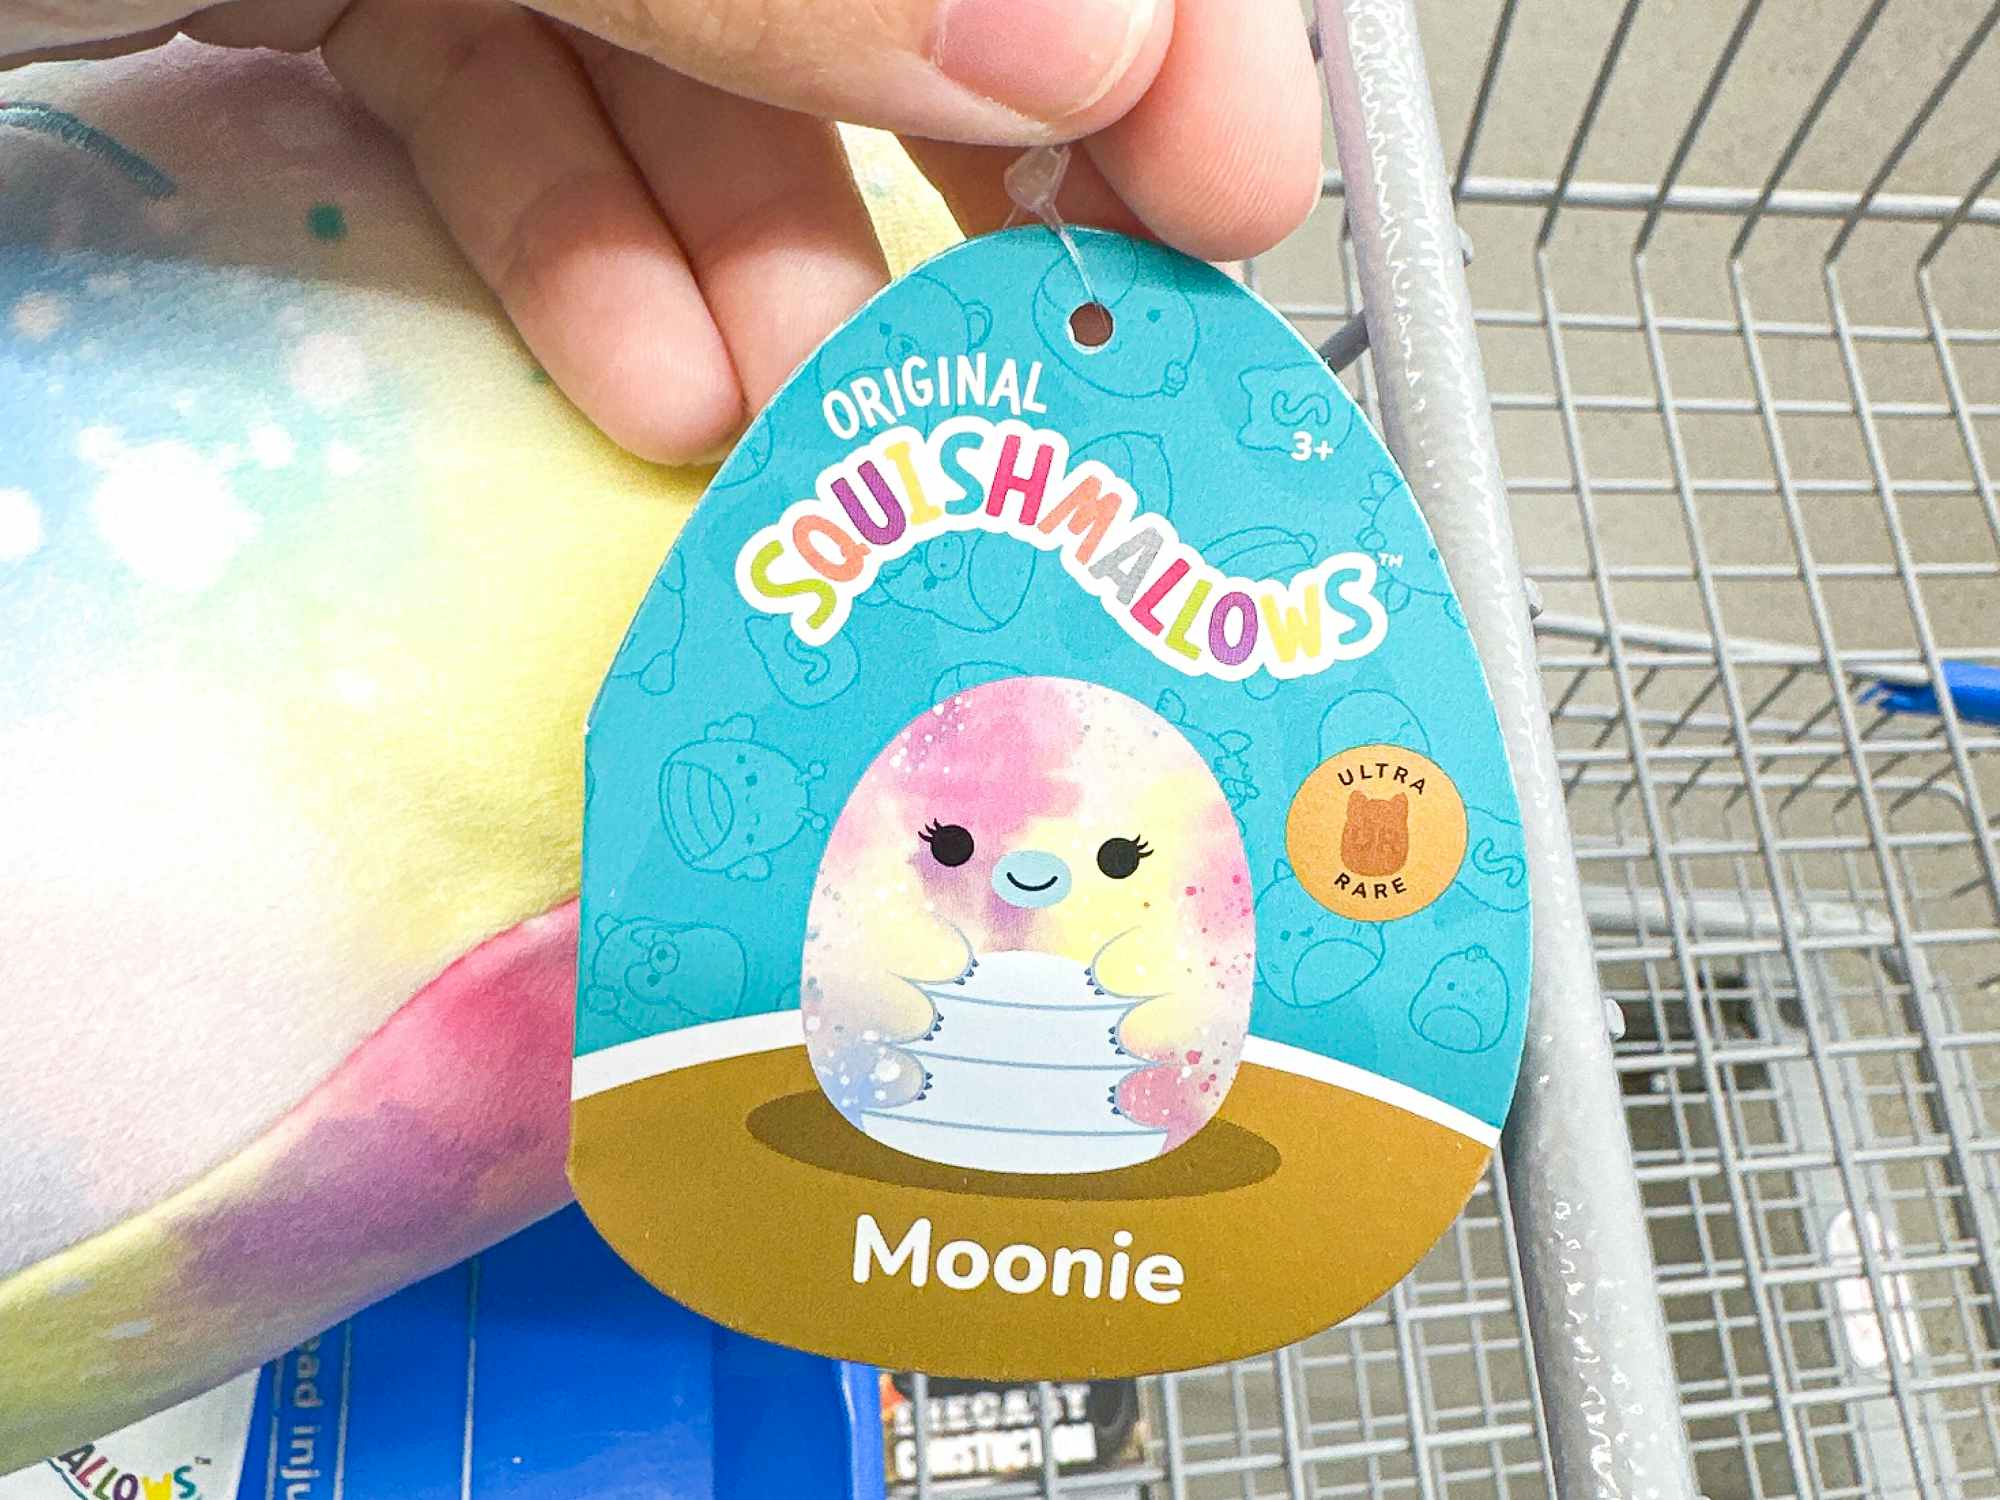 Someone holding a Ultra Rare tag for the Moonie waterbear Squishmallow at Five Below